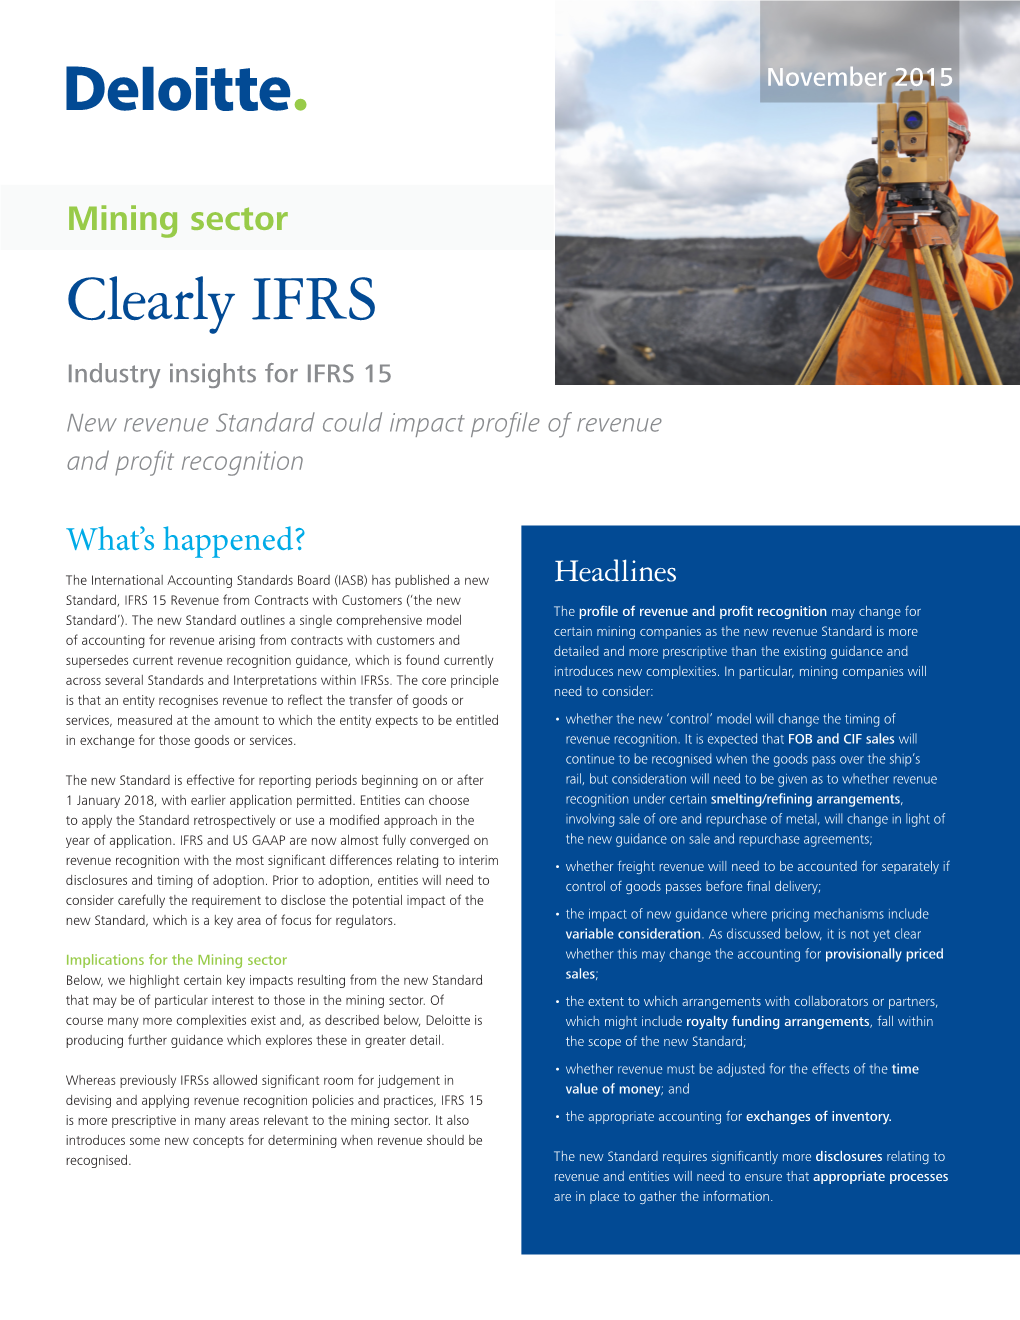 Mining Sector Clearly IFRS Industry Insights for IFRS 15 New Revenue Standard Could Impact Profile of Revenue and Profit Recognition